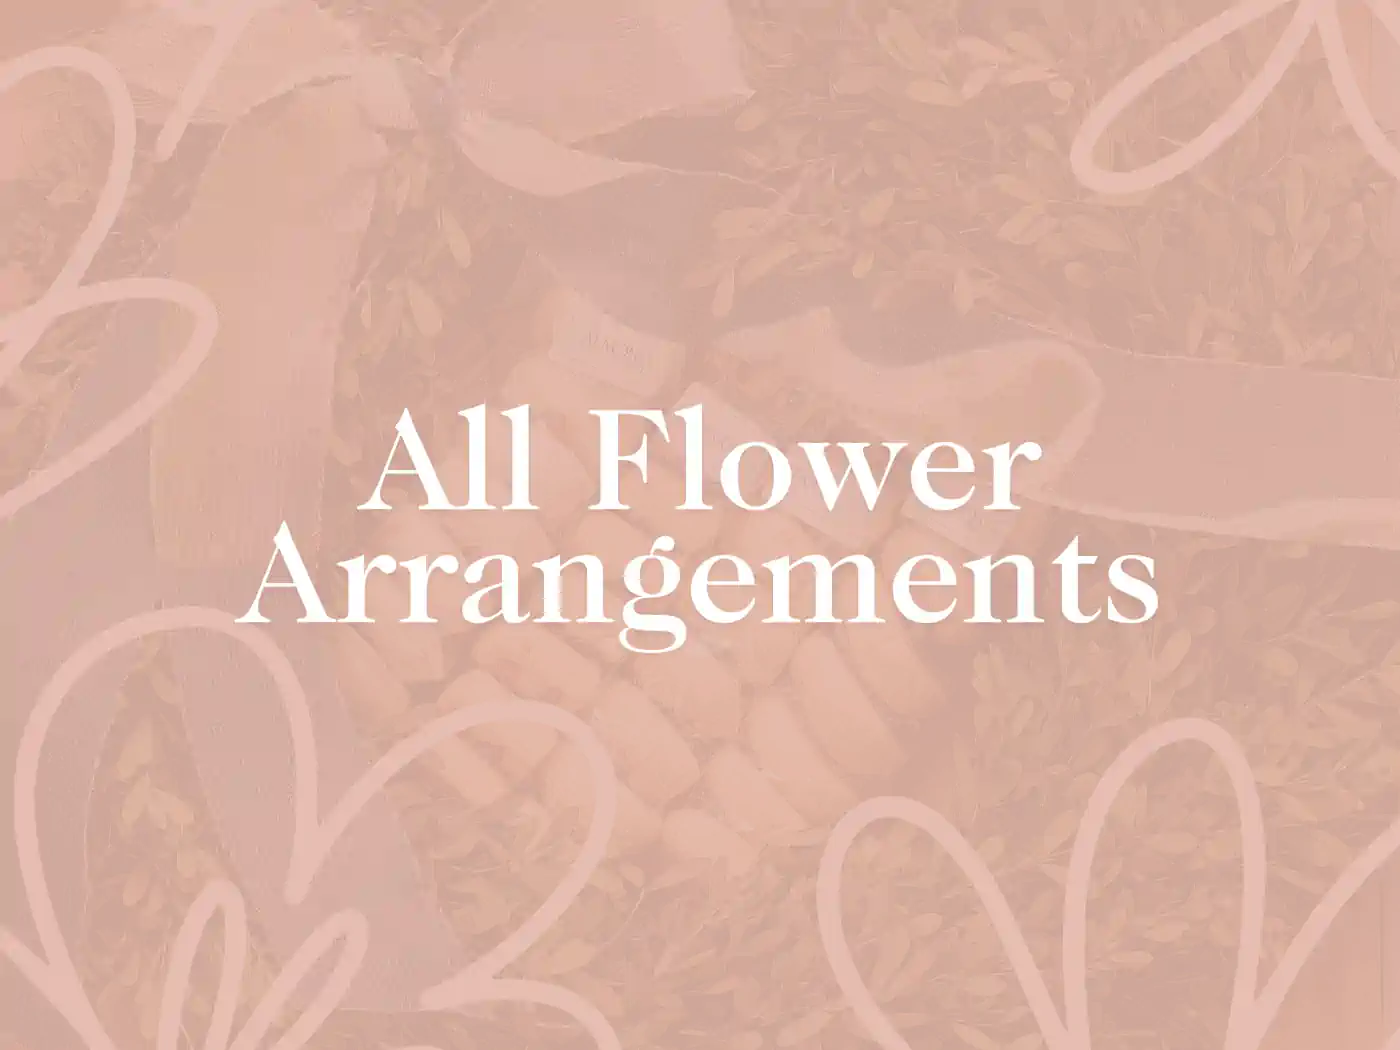 A decorative image featuring the text "All Flower Arrangements" on a pastel pink background with heart-shaped outlines. The background includes a ribbon bow and hints of floral arrangements and gift items, suggesting a focus on exquisite flower displays. The overall design conveys elegance and celebration. All Flower Arrangements Collection. Fabulous Flowers and Gifts.